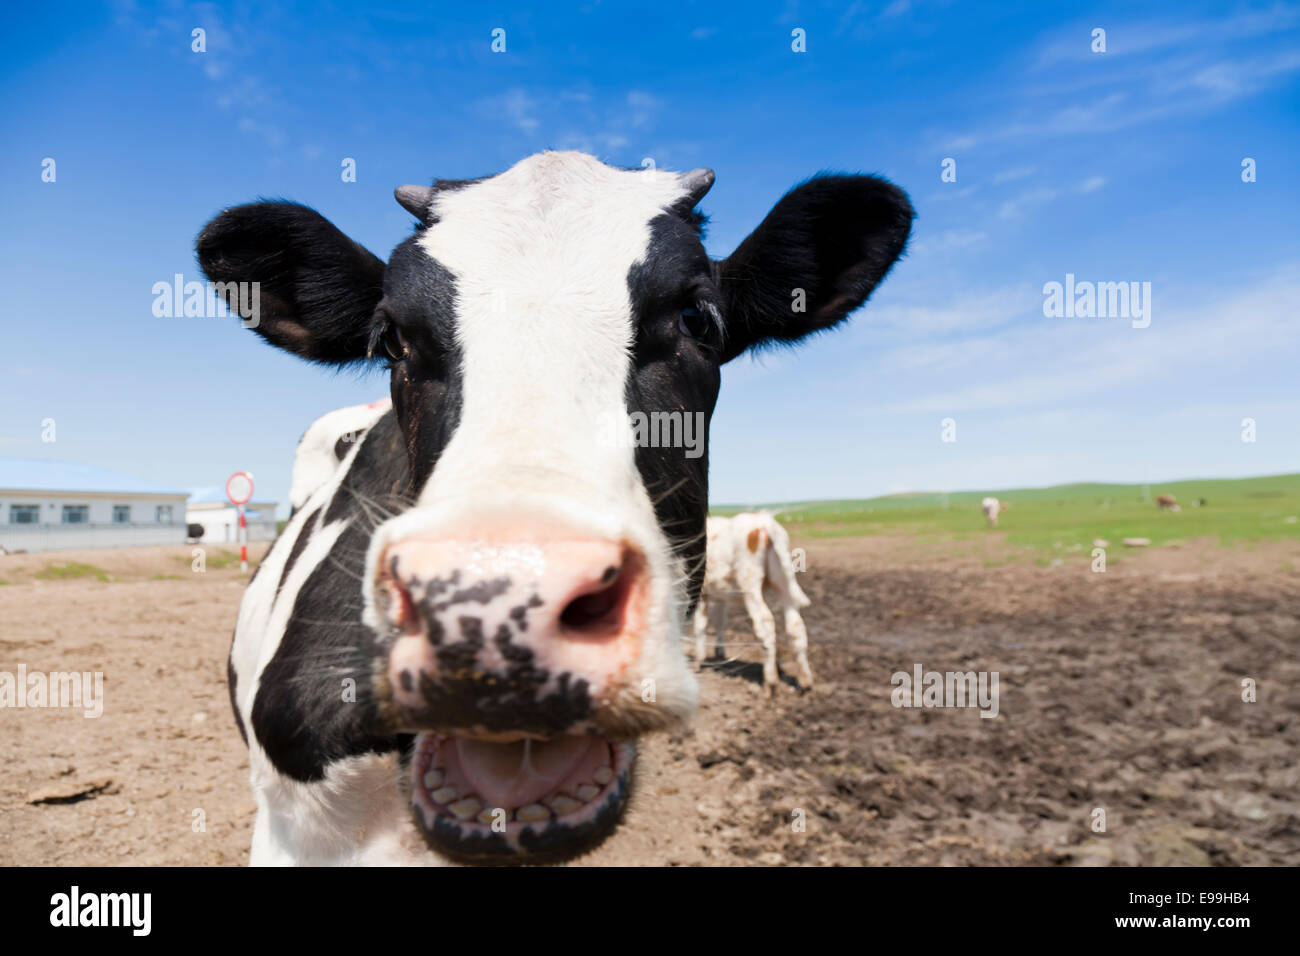 Curious cow looking at camera Stock Photo